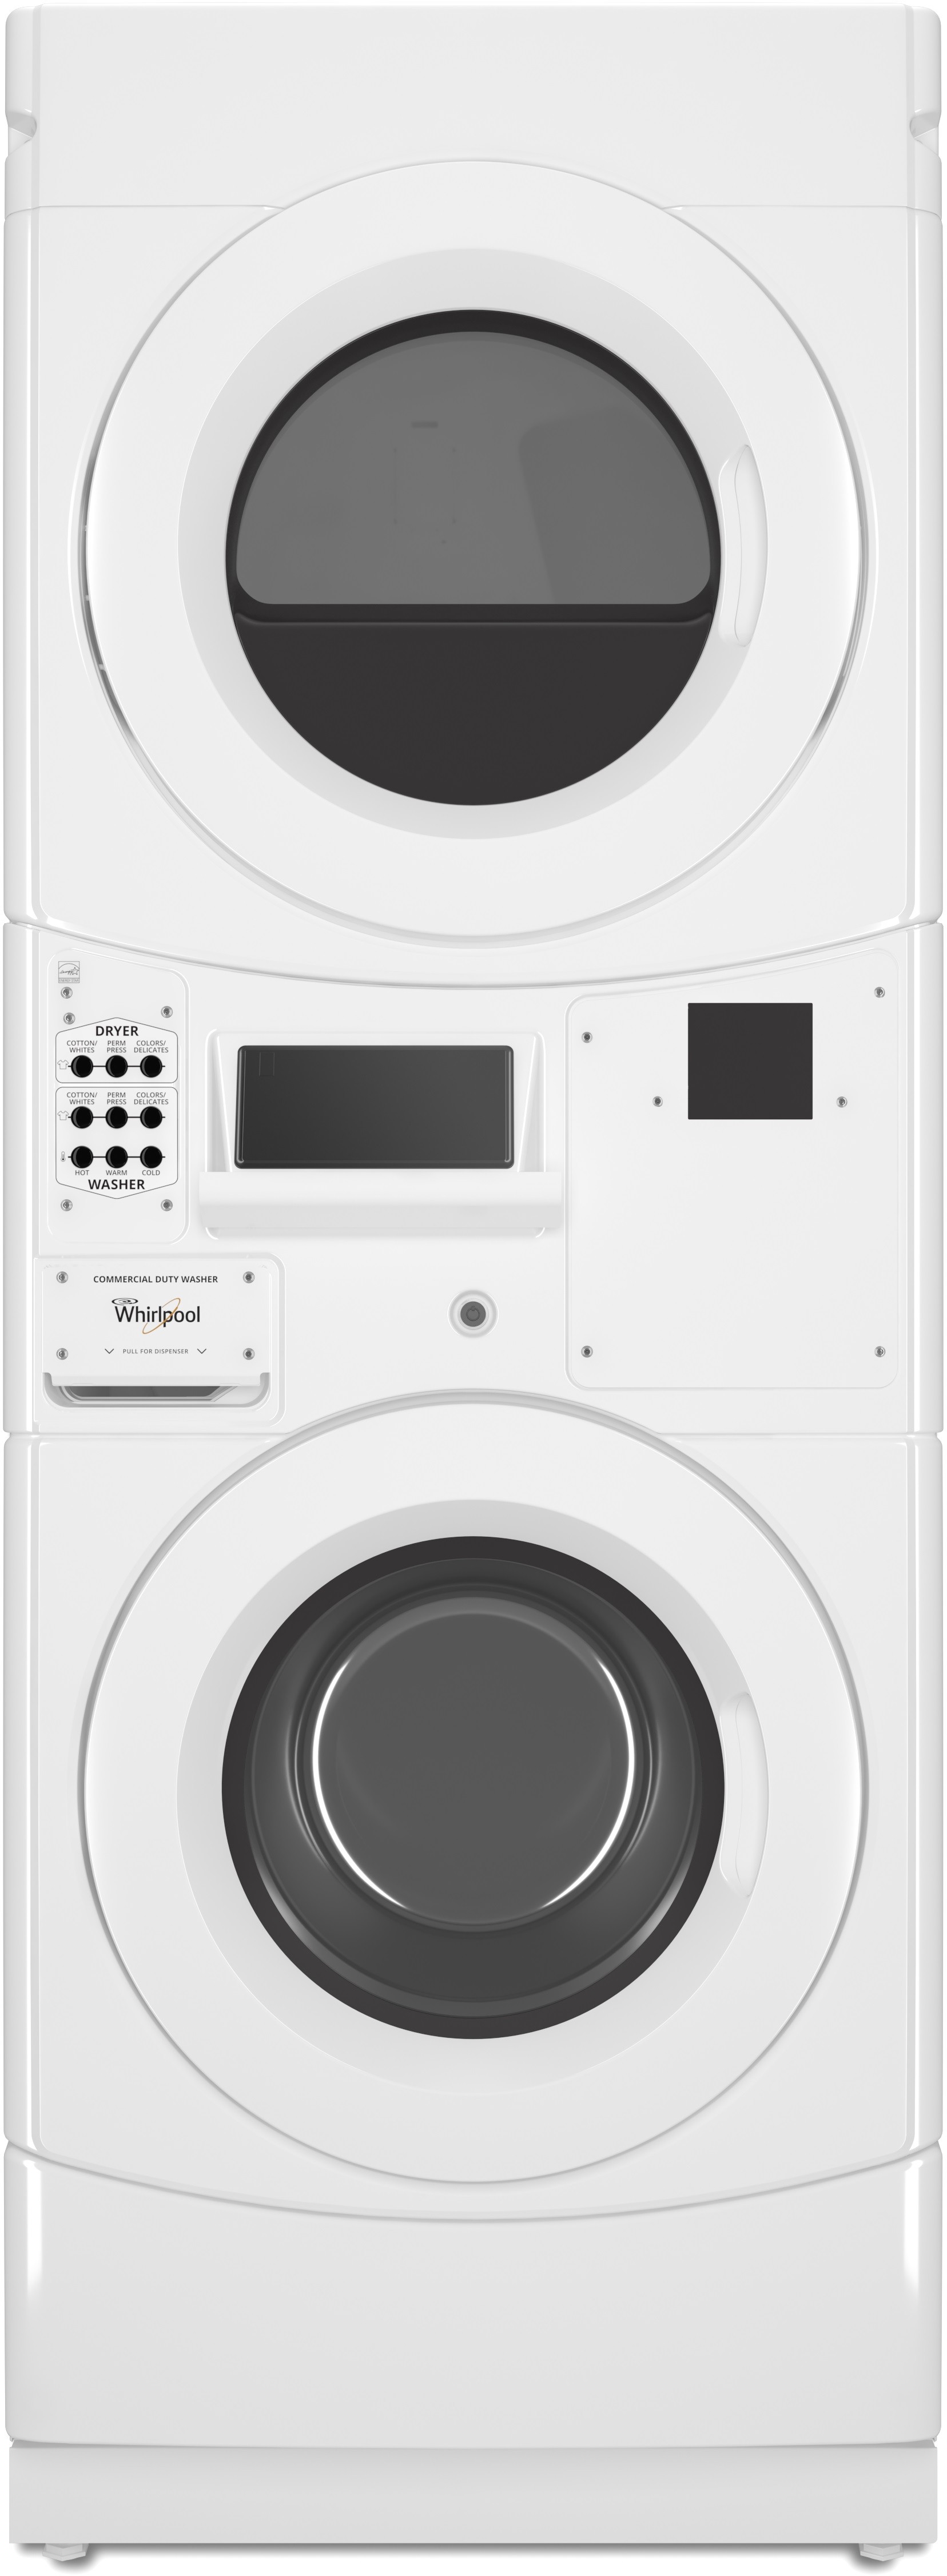 Commercial Laundry 27"" GasLaundry Center - Whirlpool CGT9100GQ